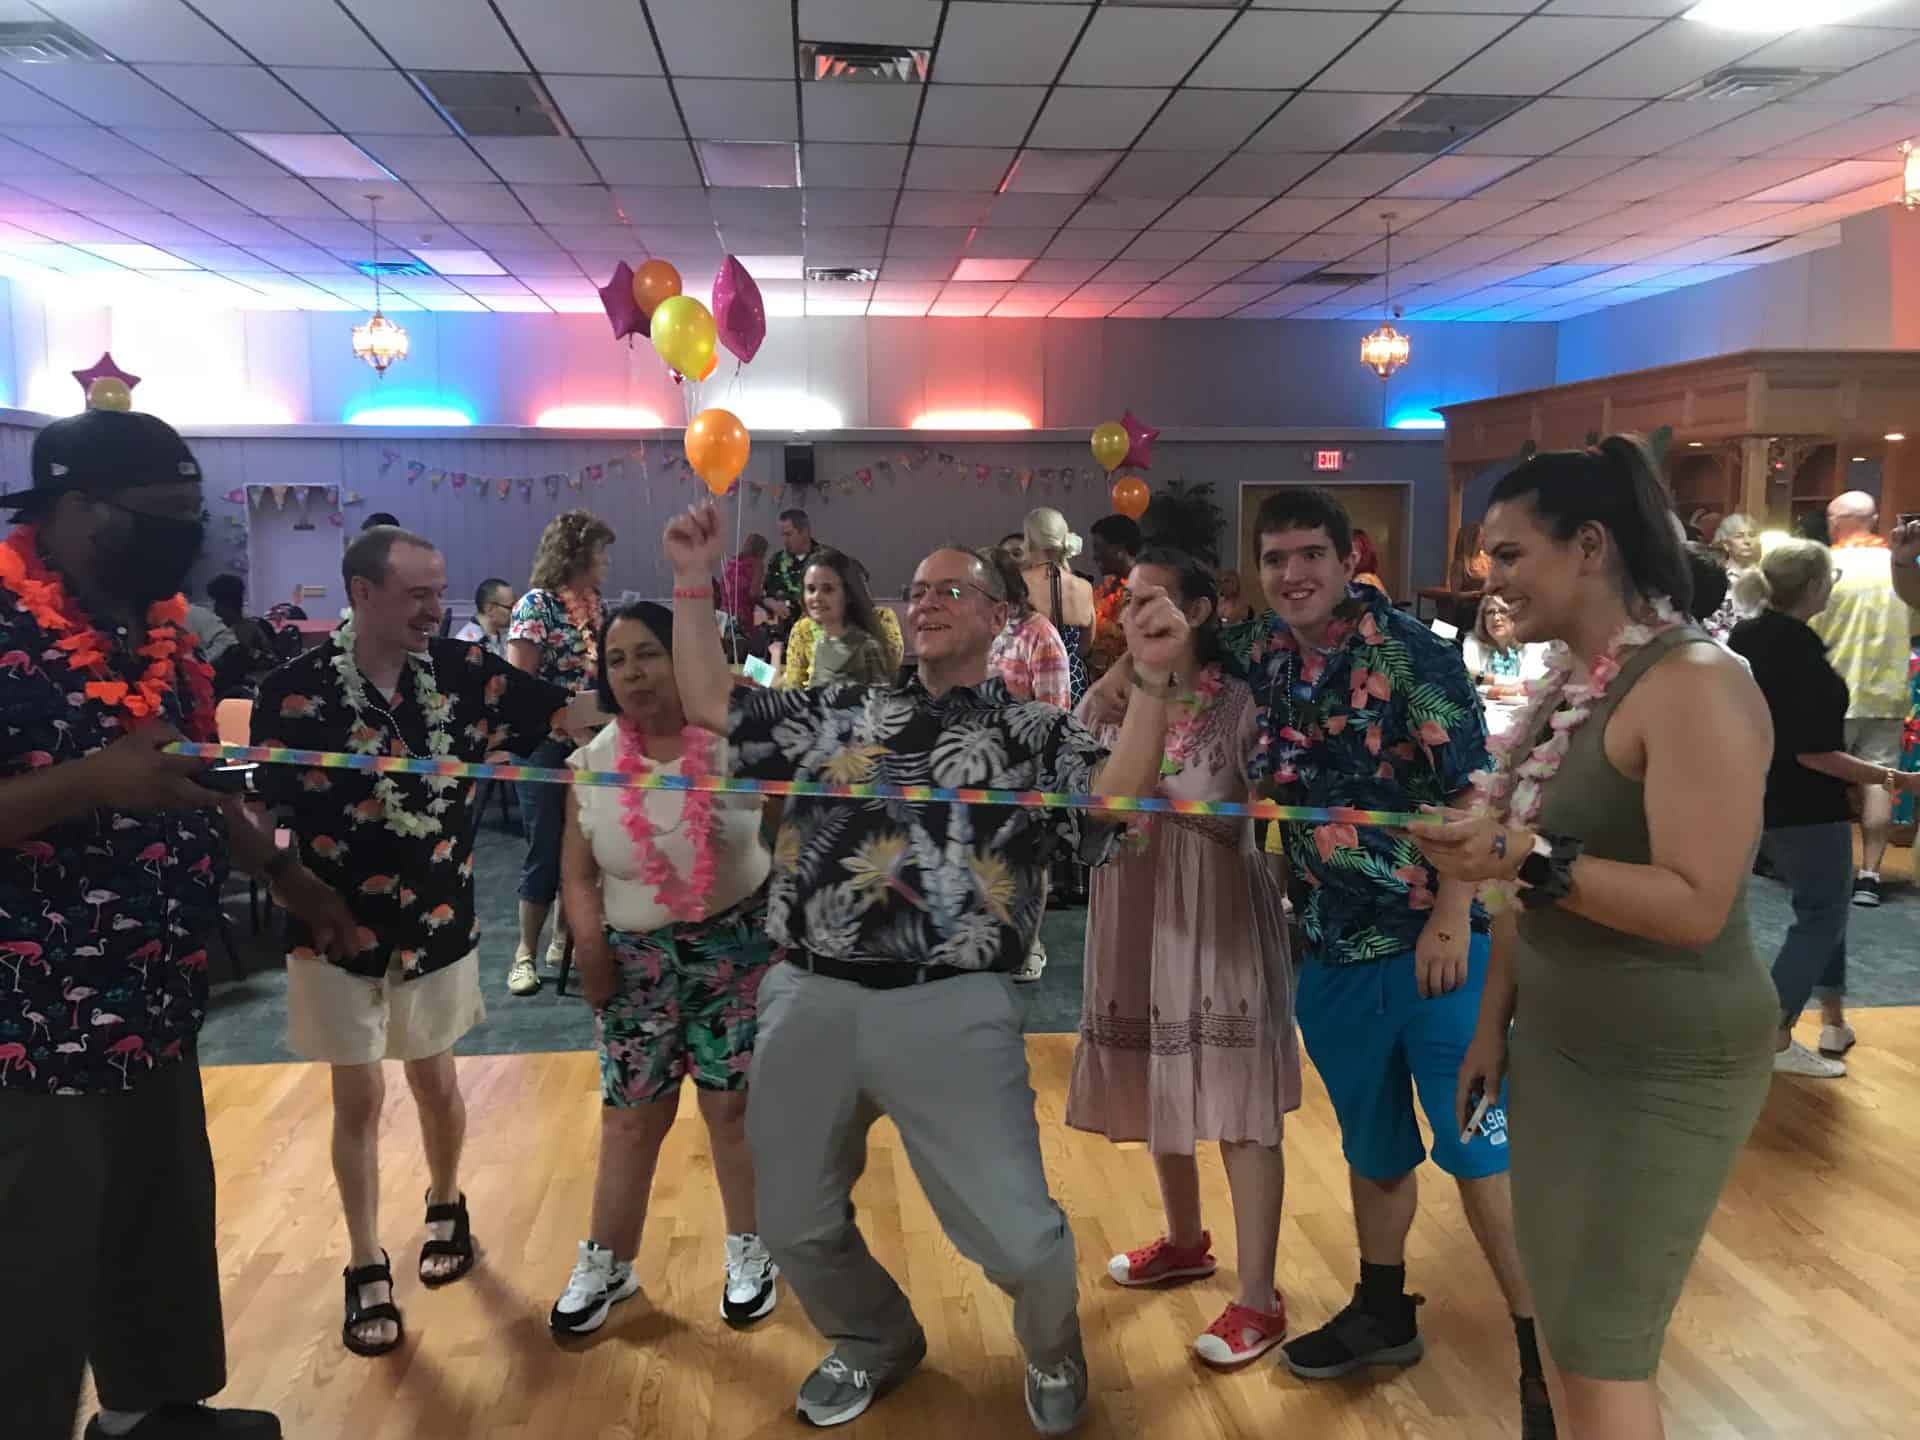  A group of people in Hawaiian shirts laughing and having fun doing the limbo with balloons in the background.